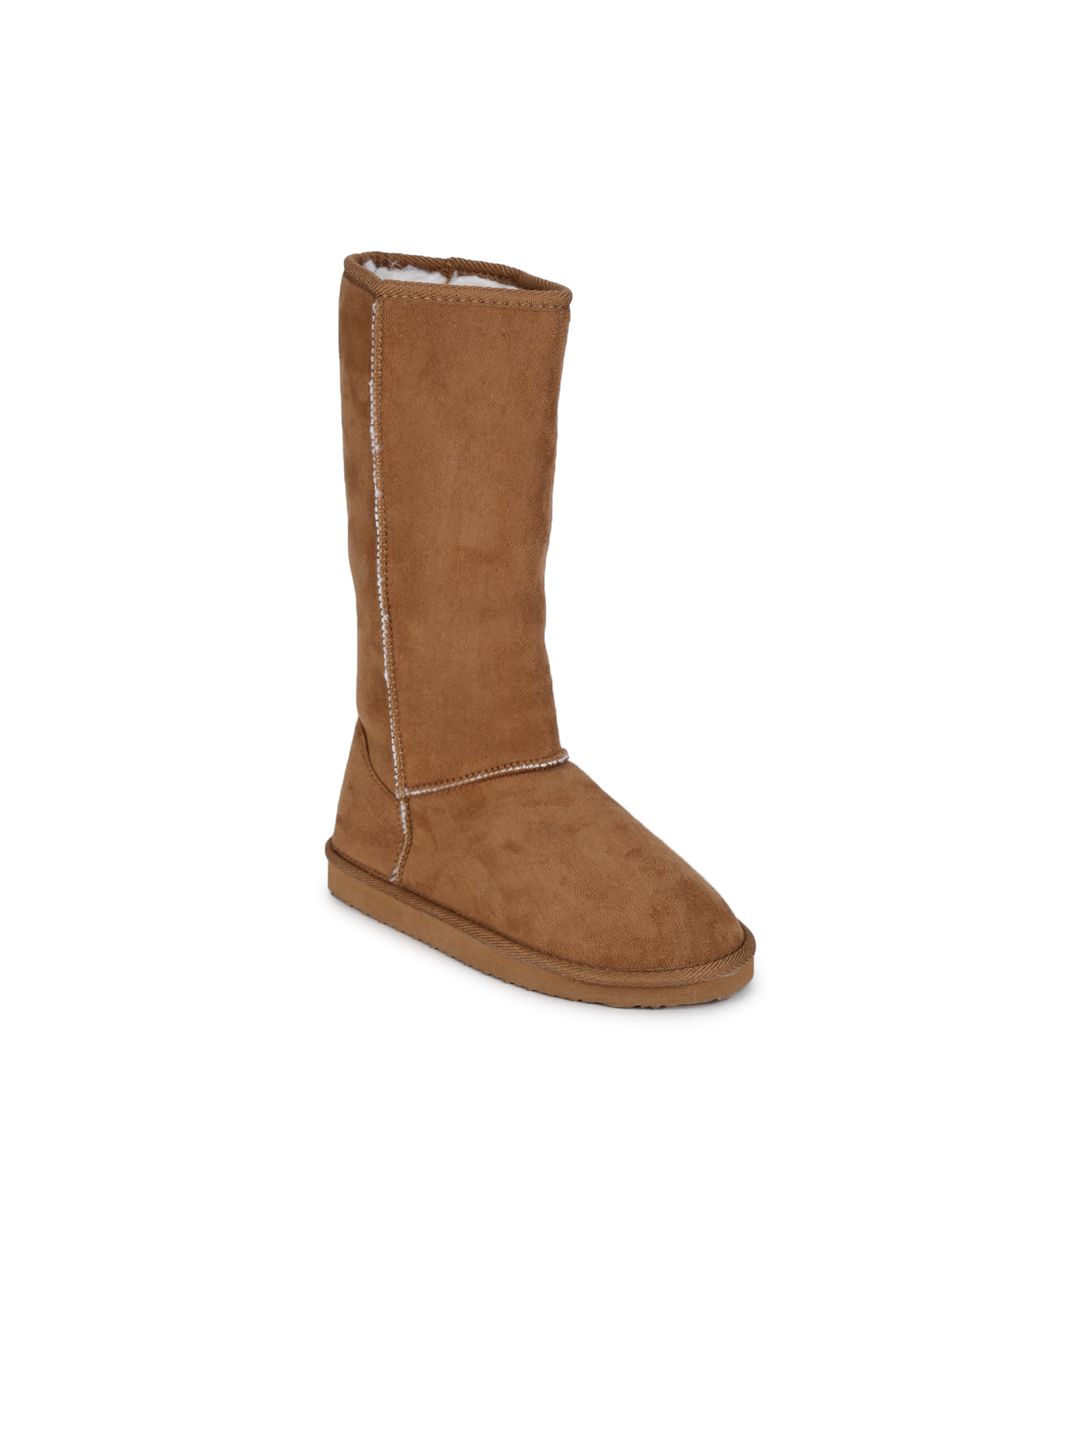 Truffle Collection Women Tan Solid Heeled Boots Price in India